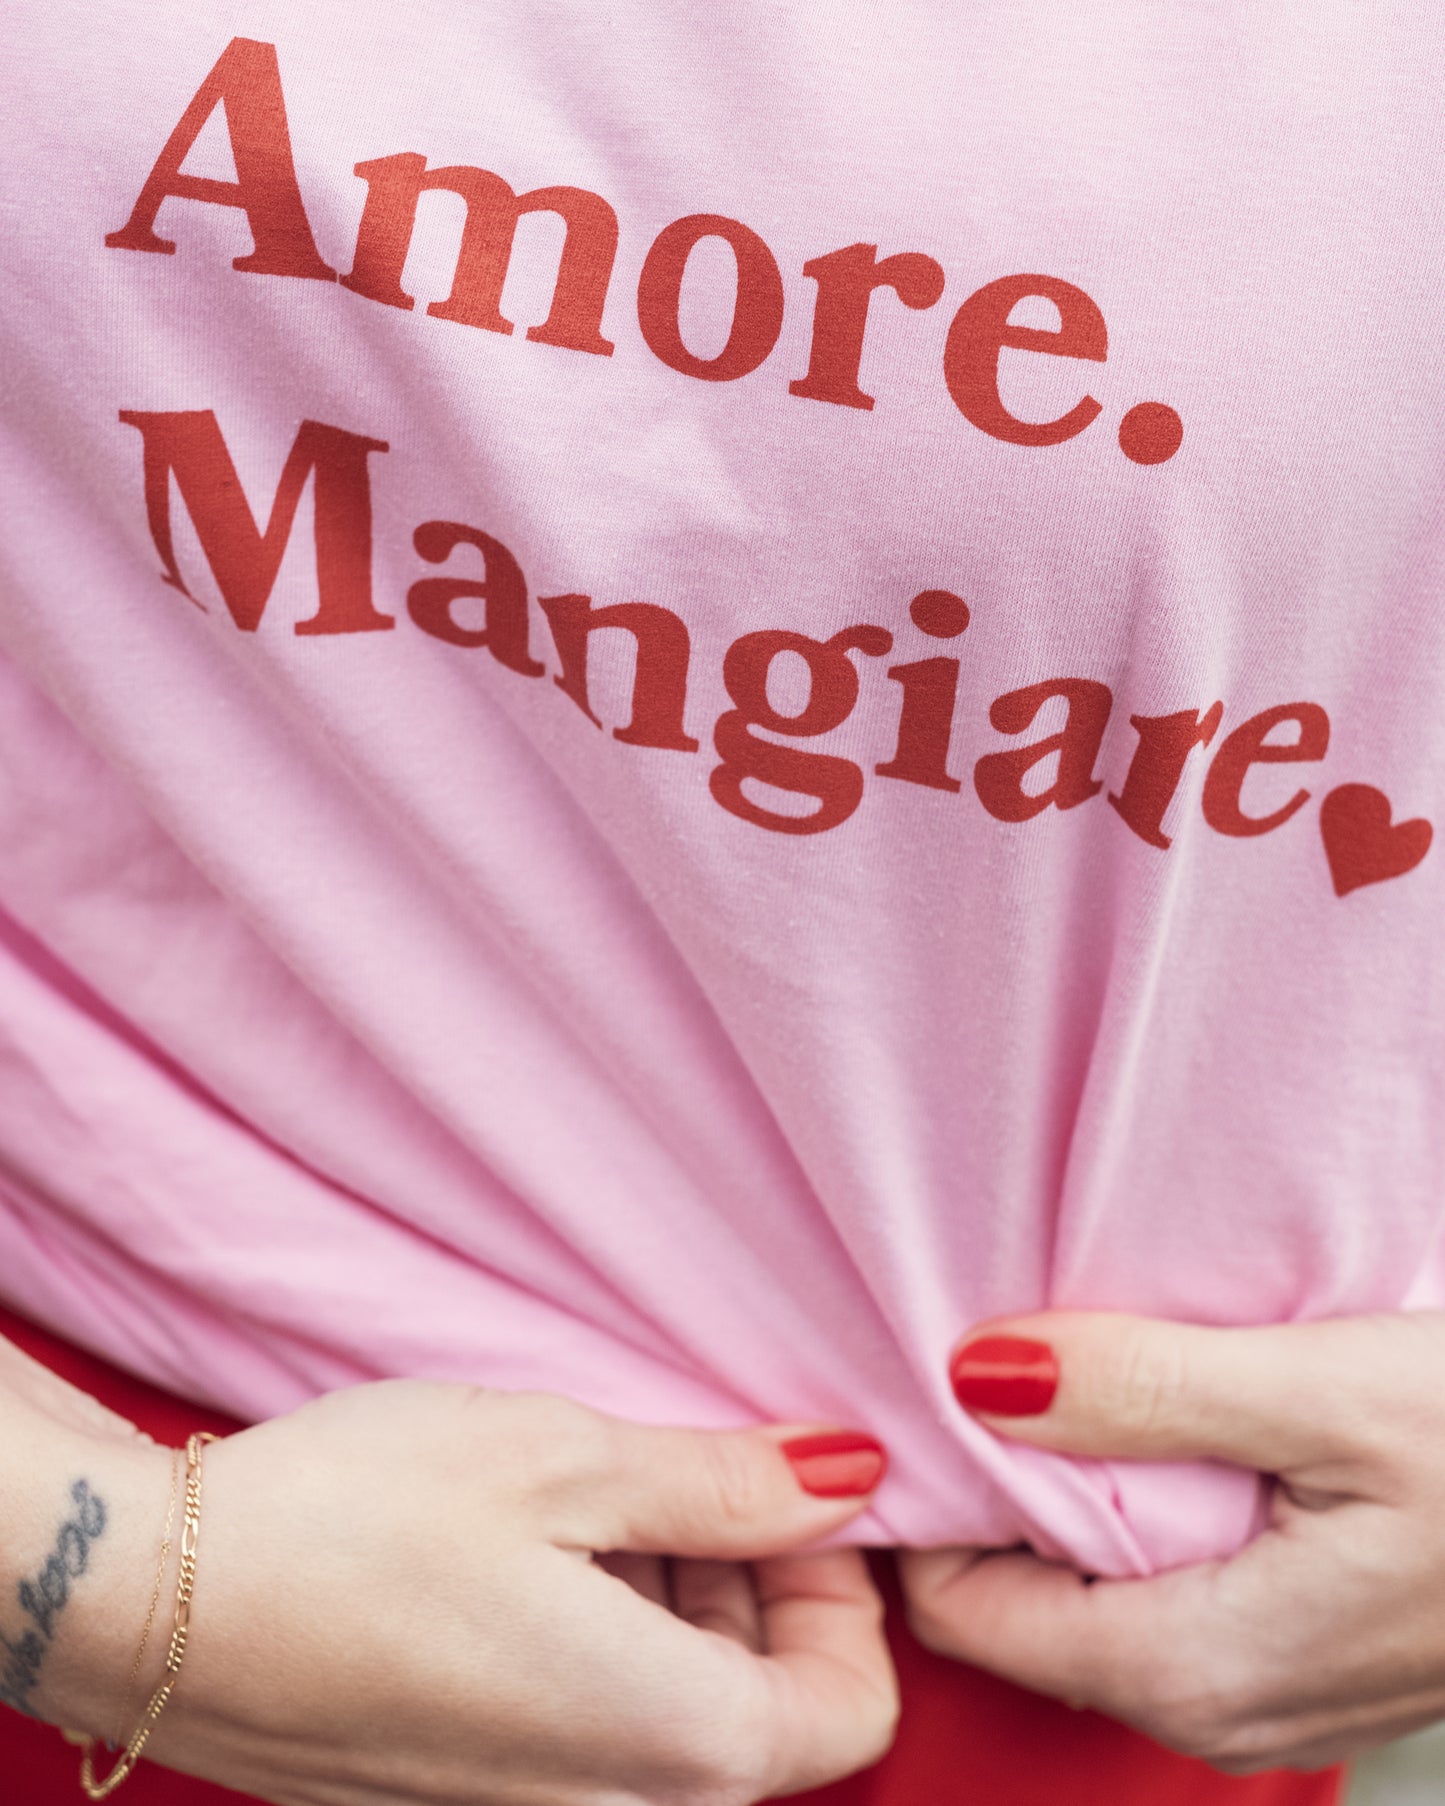 T-shirt Sole Amore Mangiare Unisex The Bowl Book